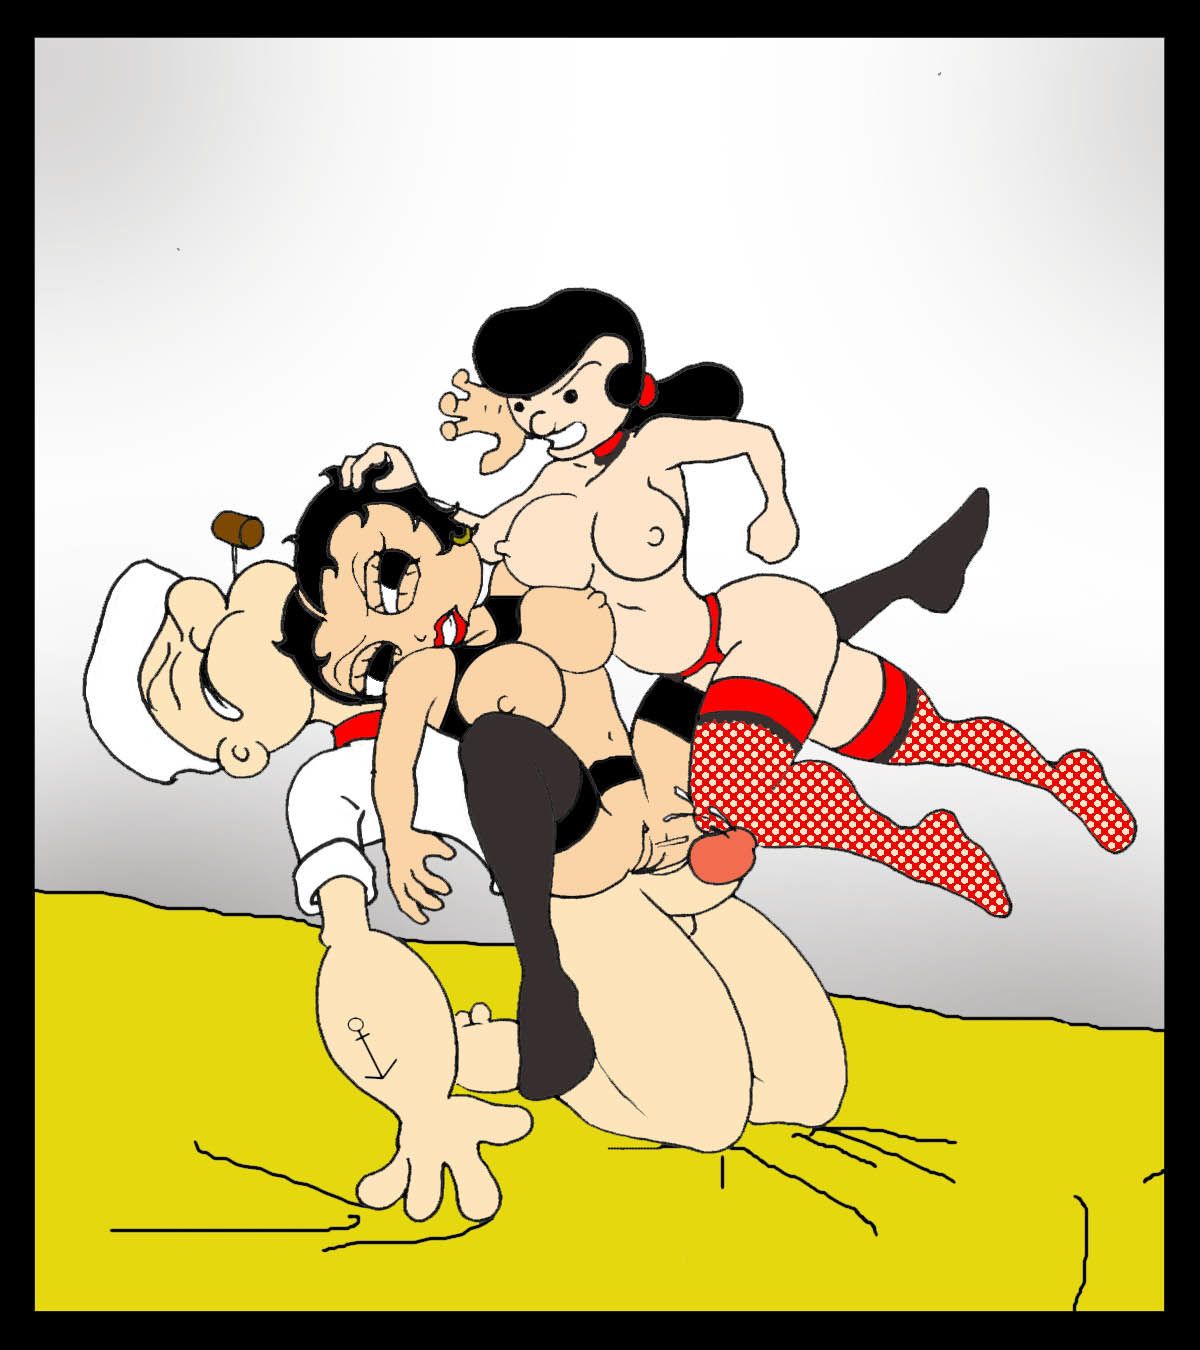 Cromisch Shiver me Timber (Betty Boop- Popeye)